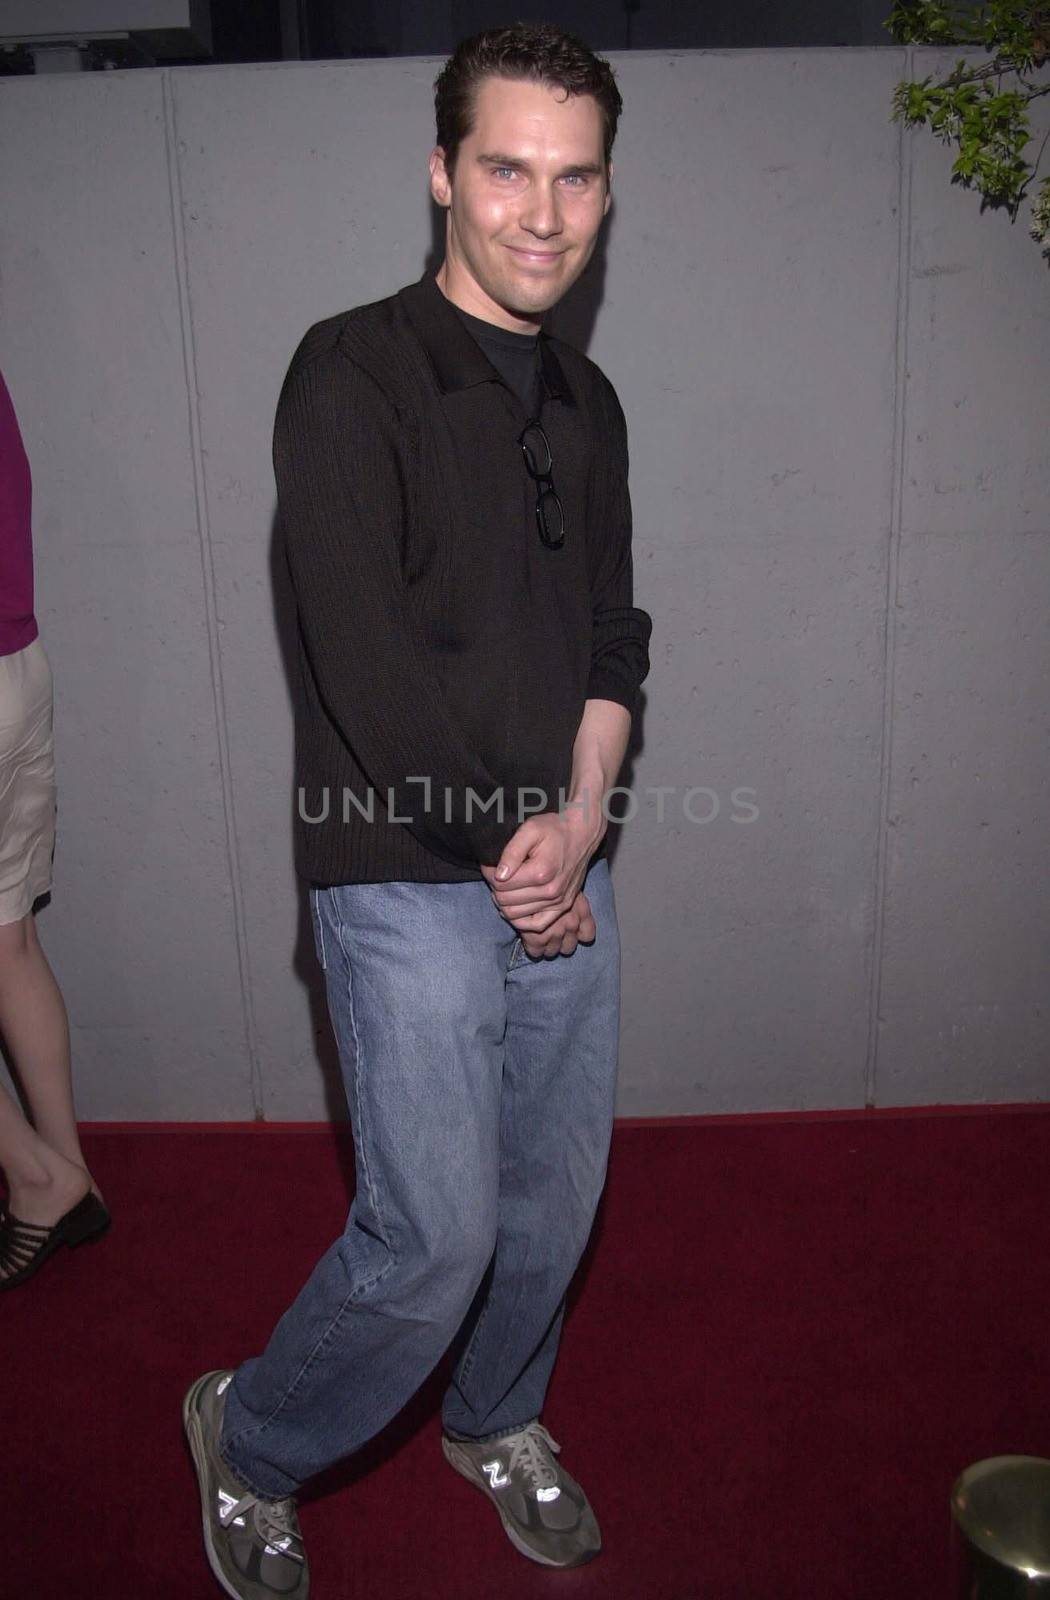 Bryan Singer at the premiere of Lions Gate Film's "THE BIG KAHUNA" in Hollywood, 04-26-00